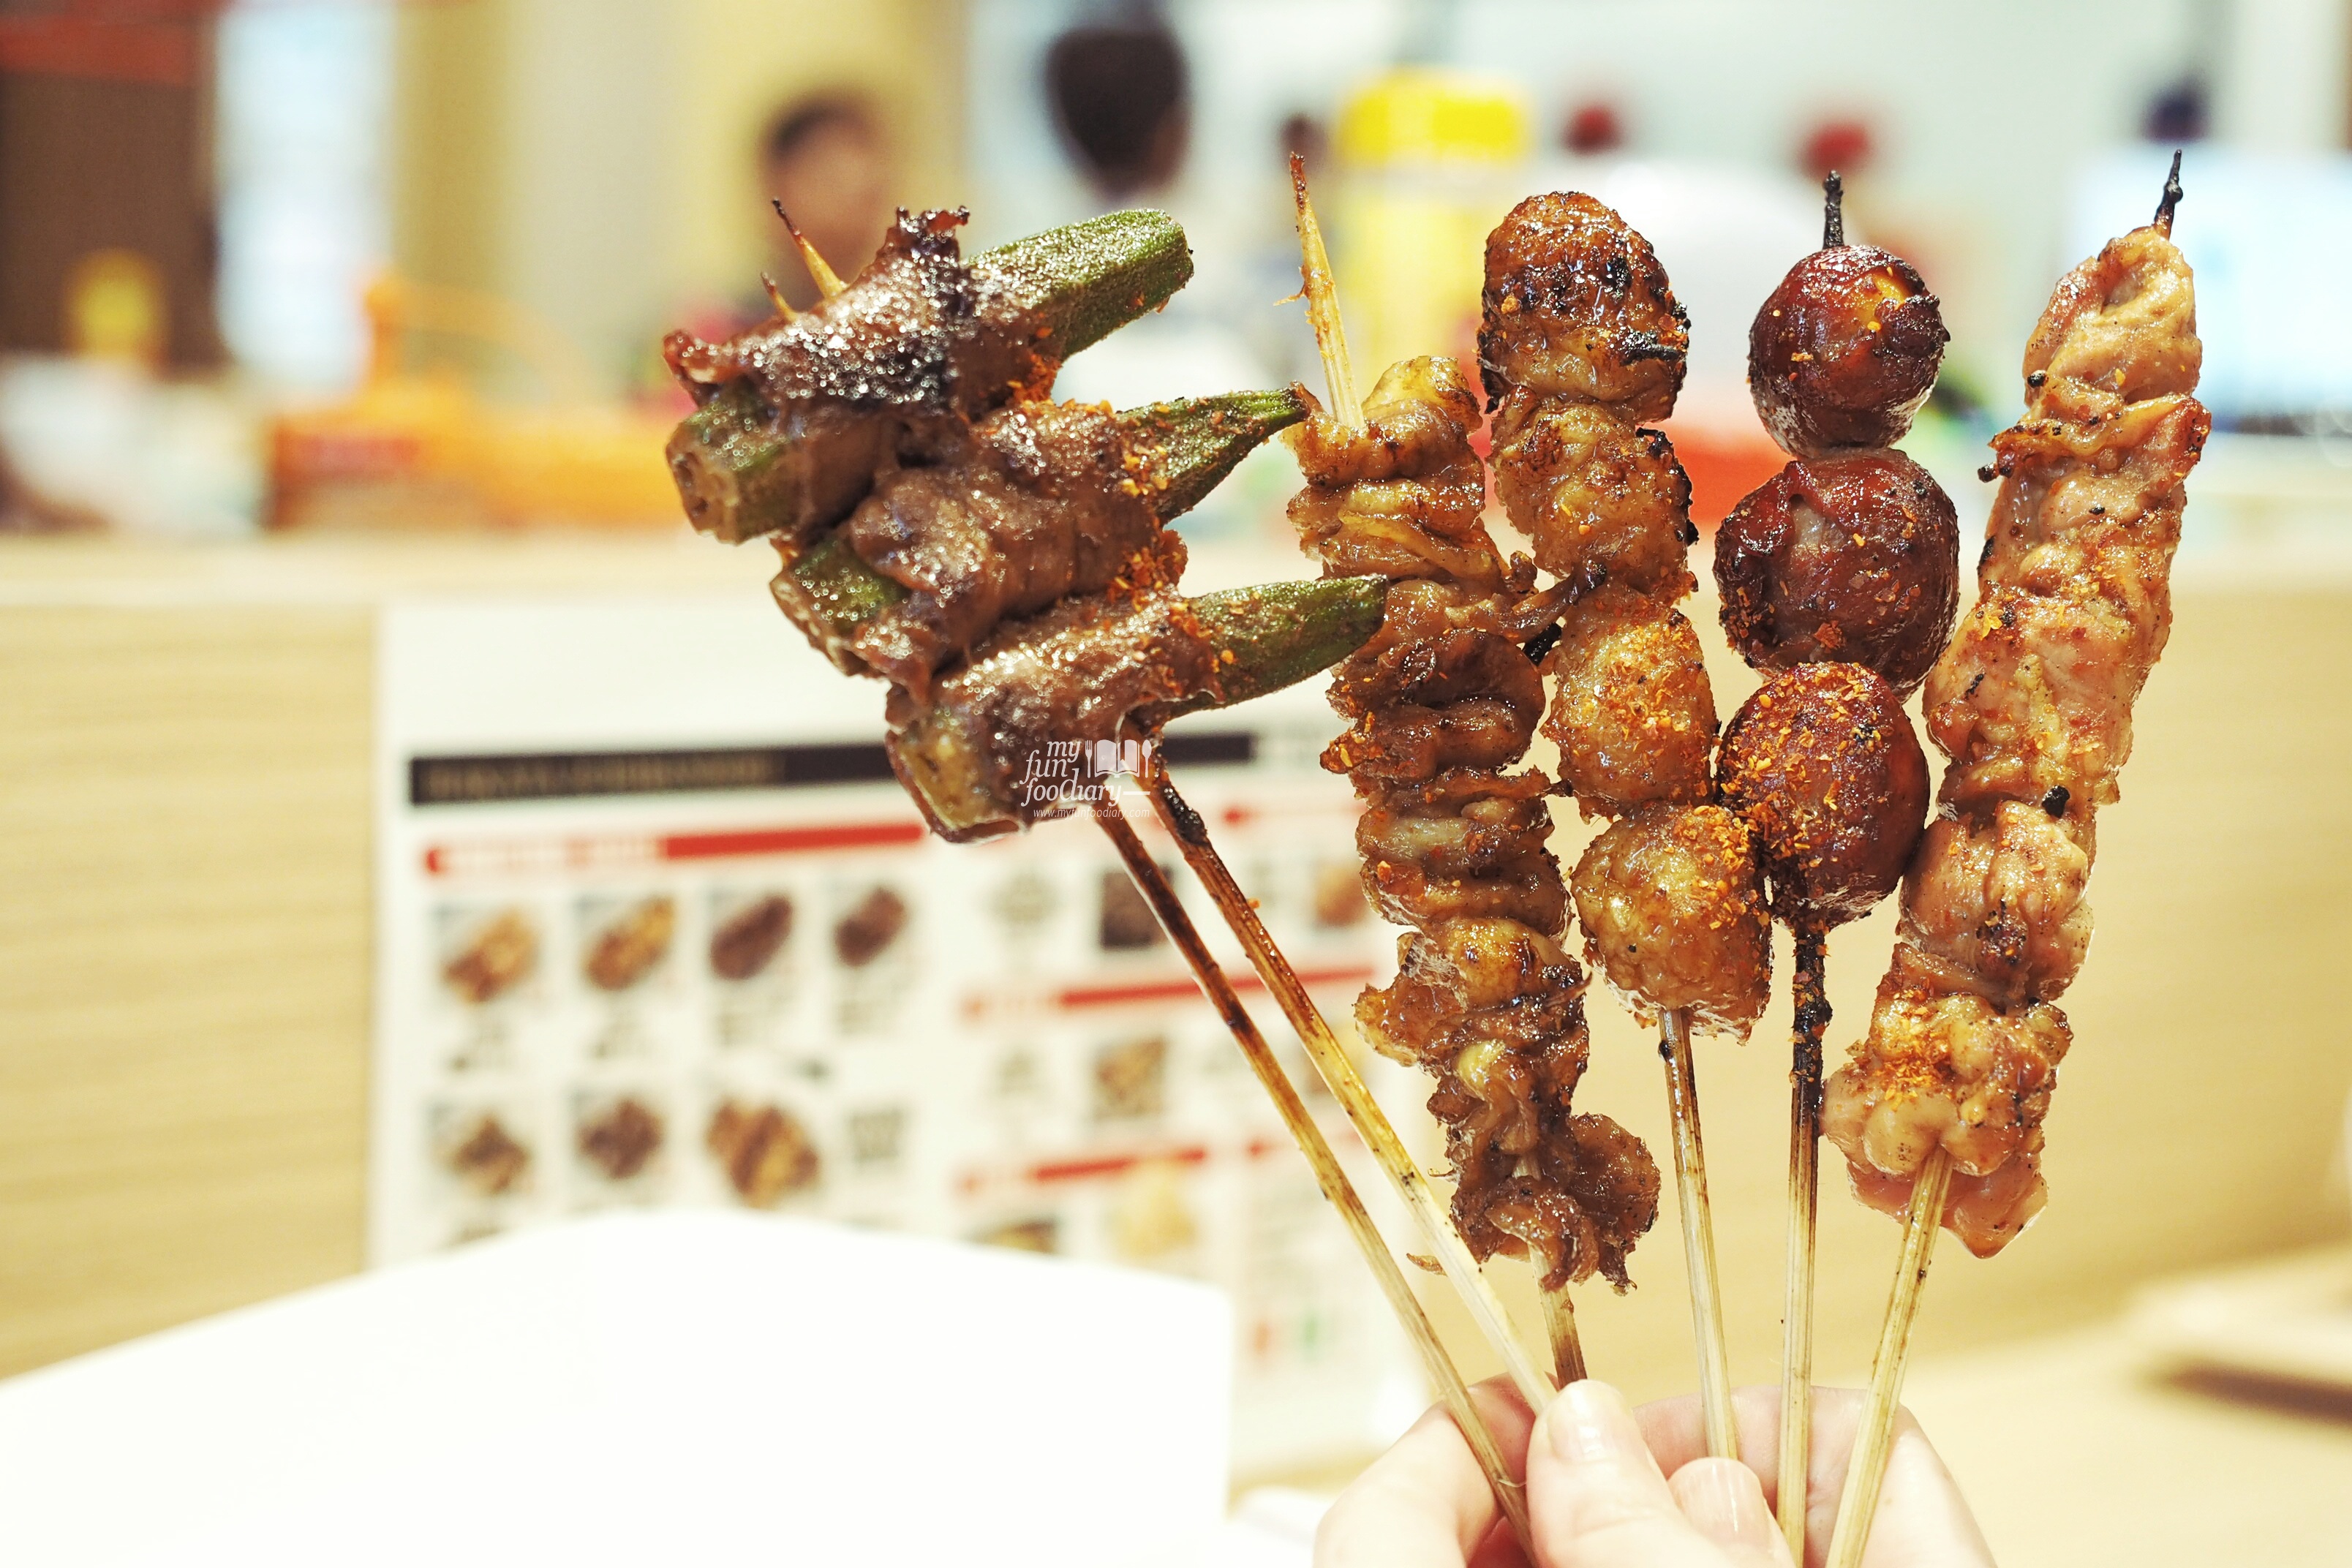 Combo Chicken Skewers - Yakitori at The Food Culture AEON Mall by Myfunfoodiary